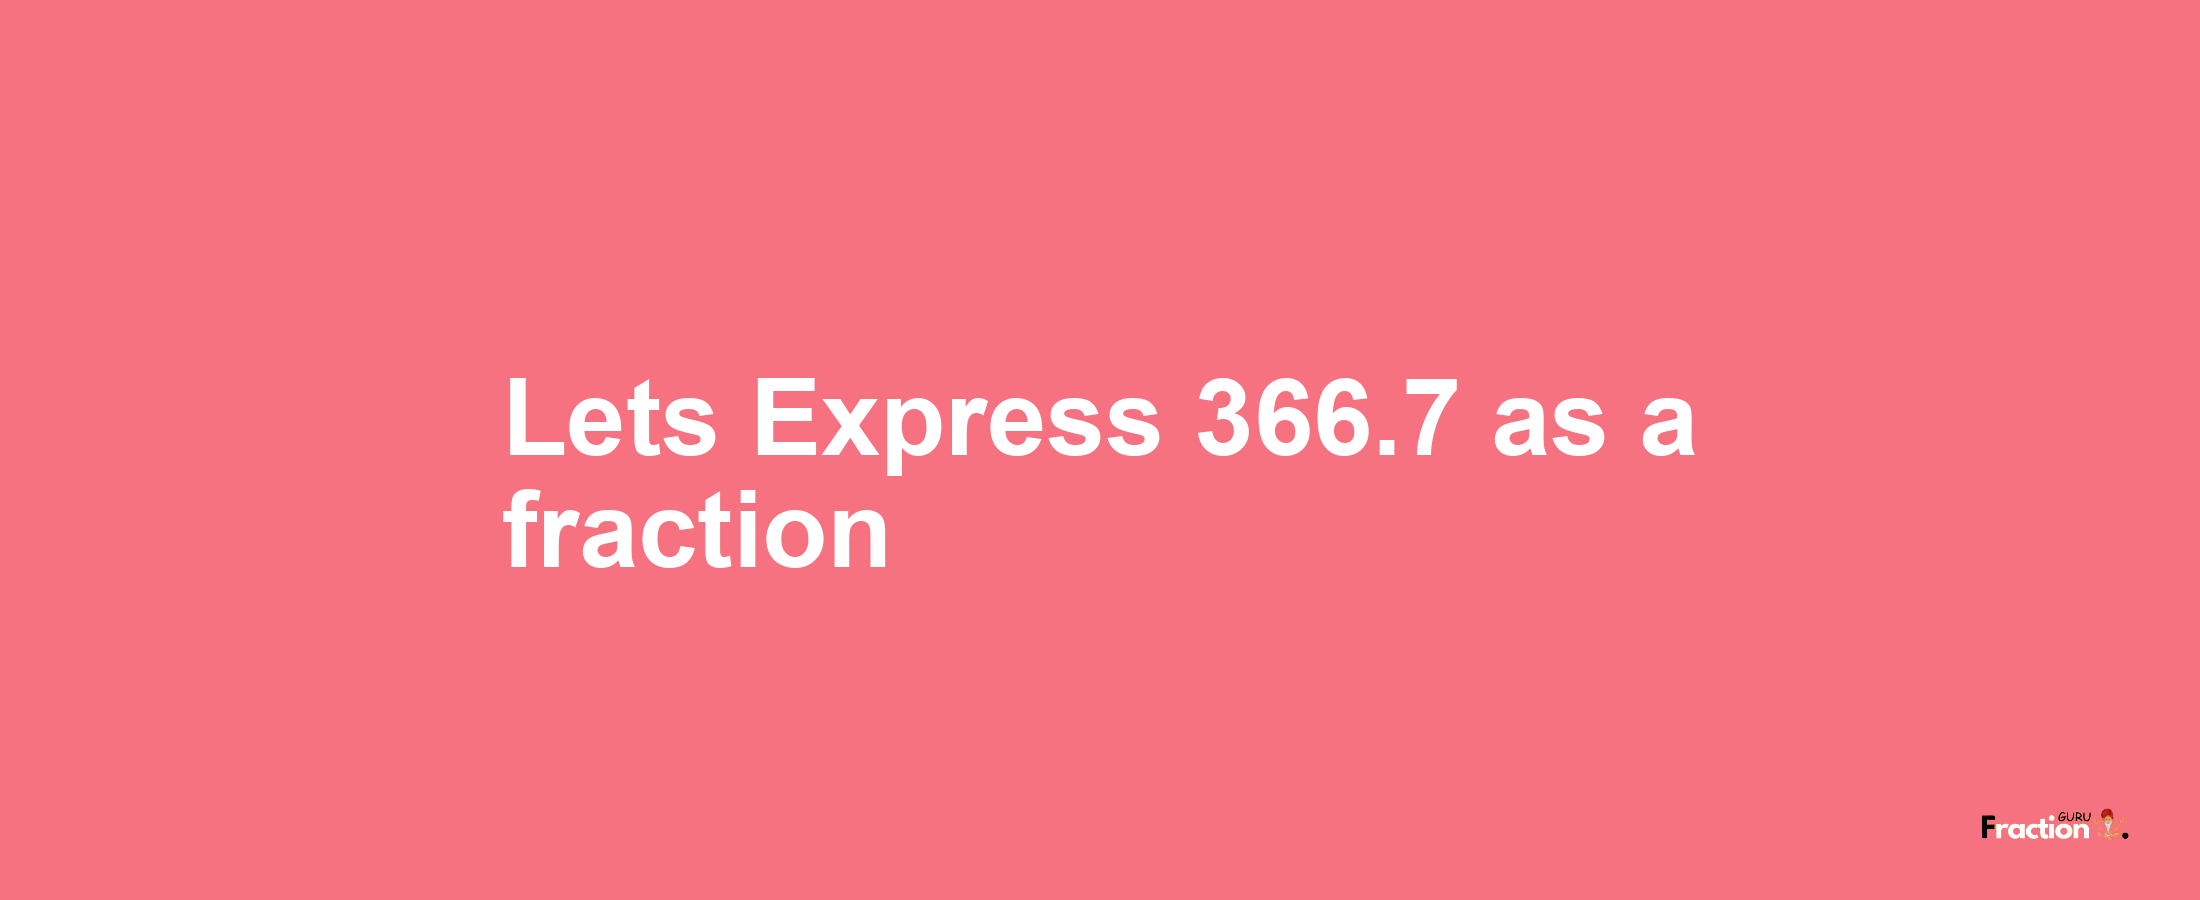 Lets Express 366.7 as afraction